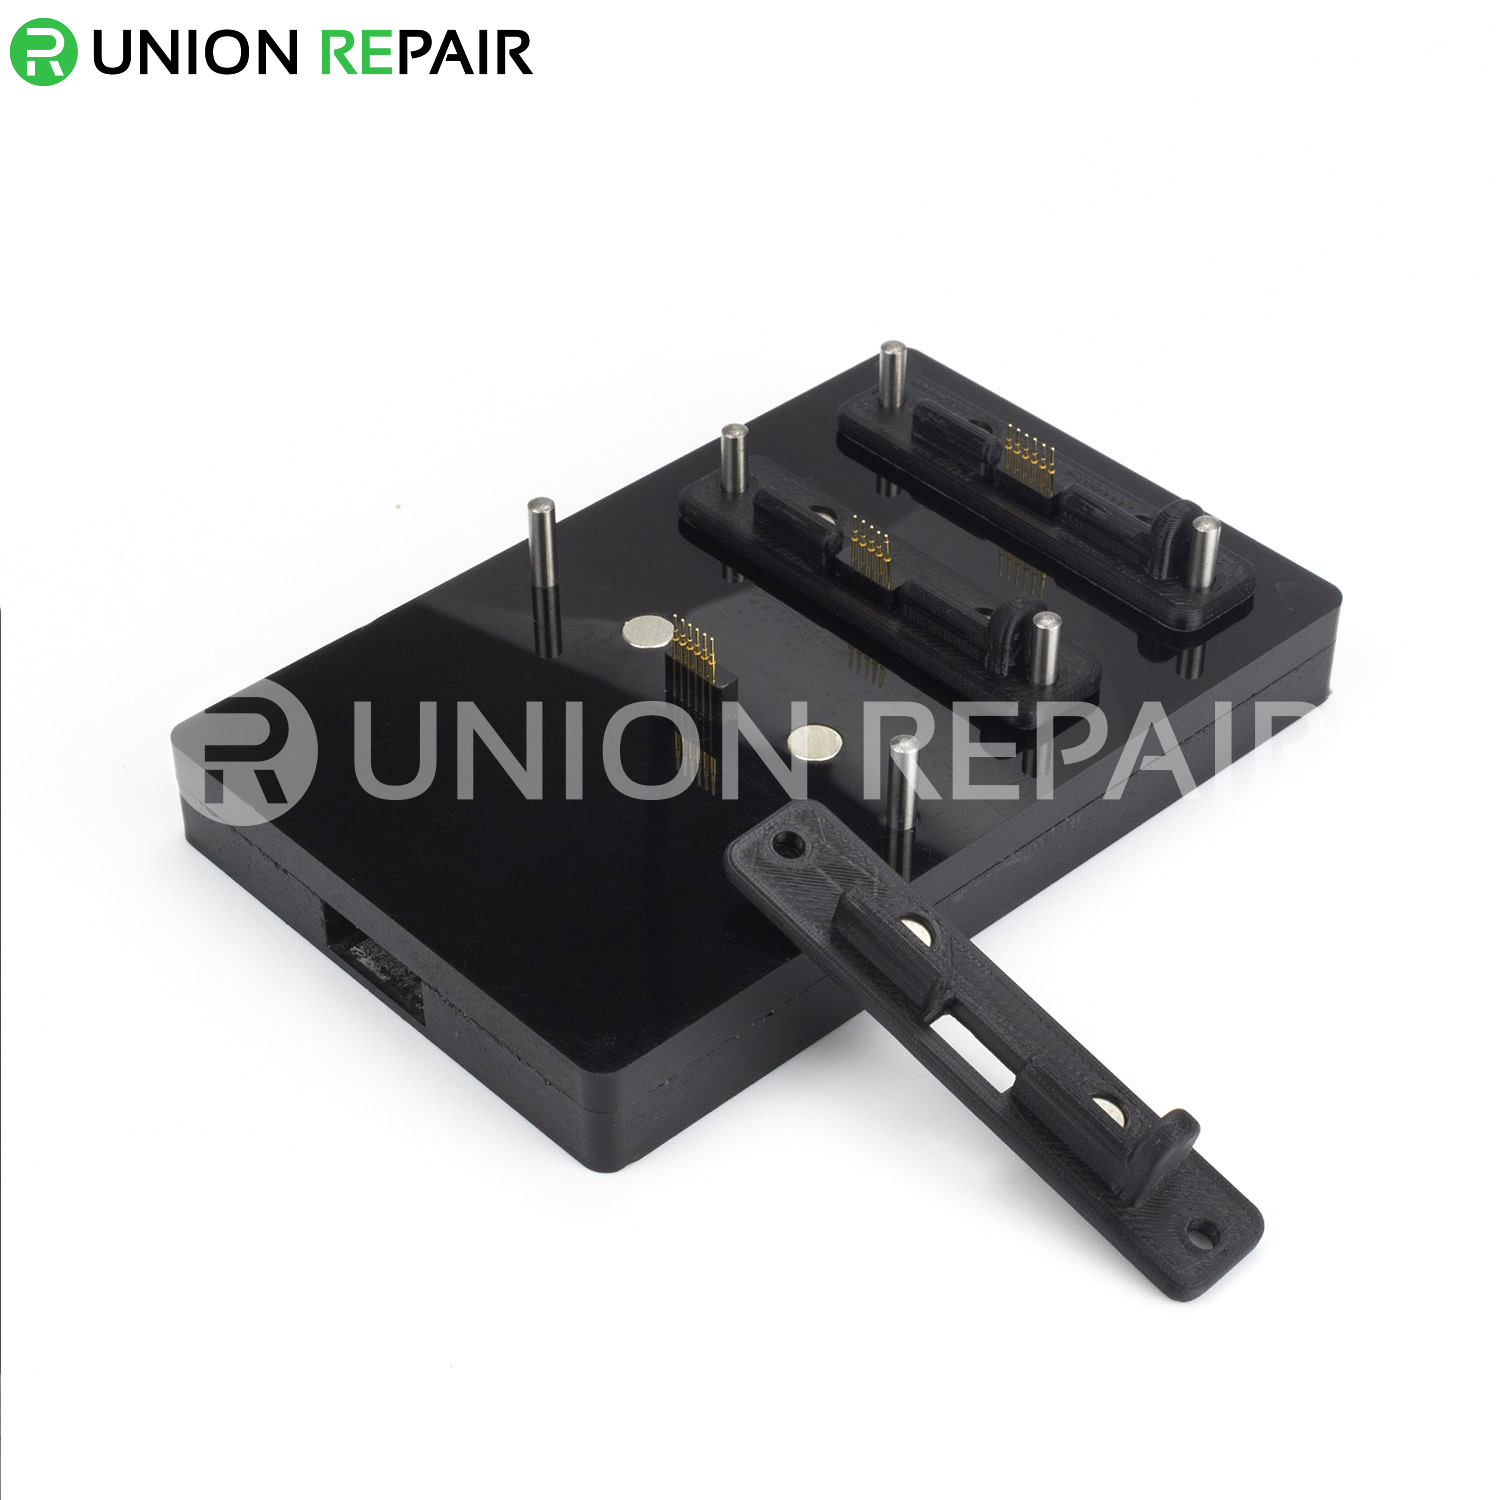 iBus AWRT Adapter Restore Tool for iWatch S1/S2/S3/S4/S5/S6 Recovery